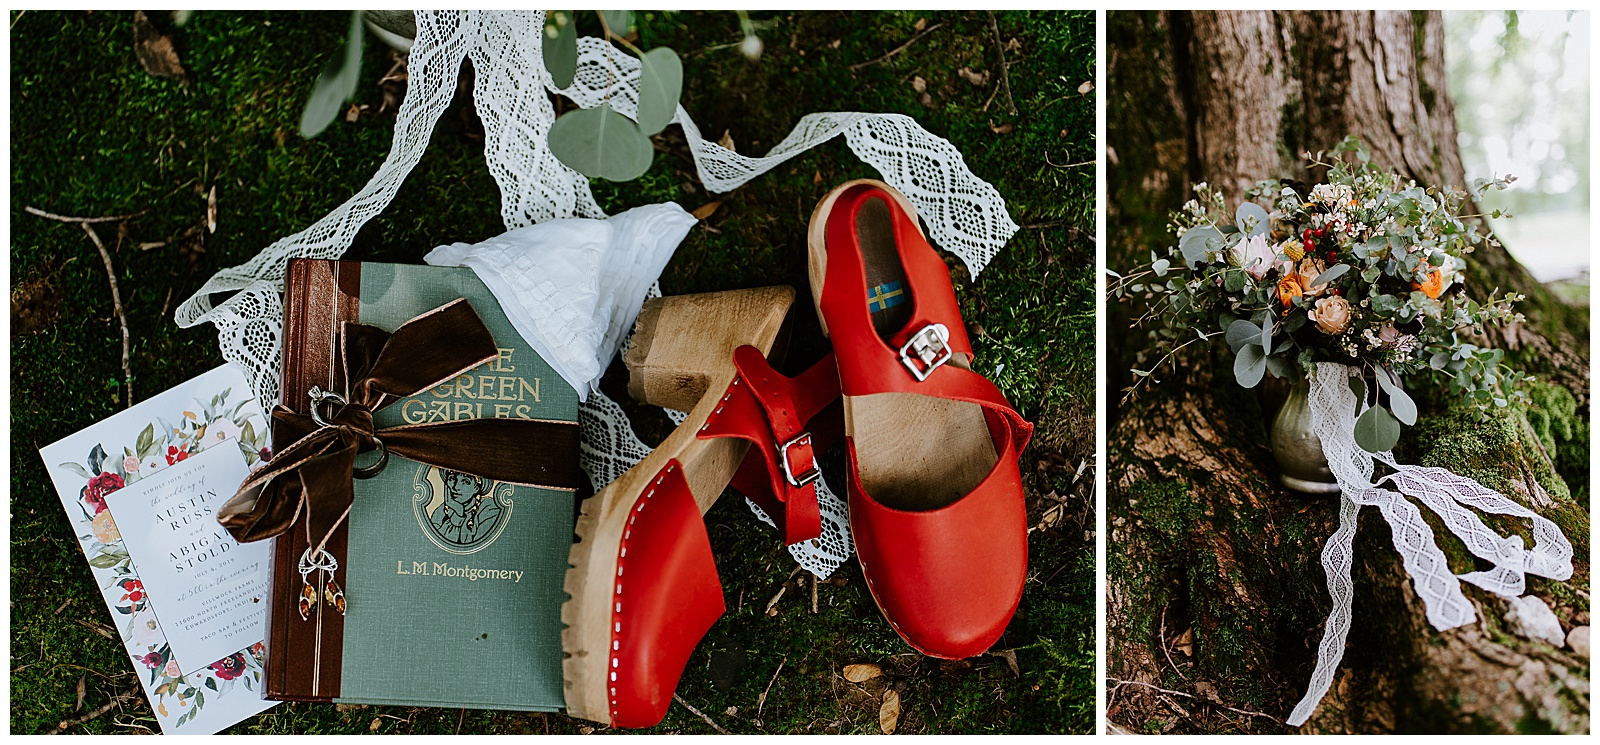 dutch wedding clogs with literary wedding details. Jewel toned eclectic florals, romantic and whimsical wedding invitations, whimsical flowers, whimsical wedding details